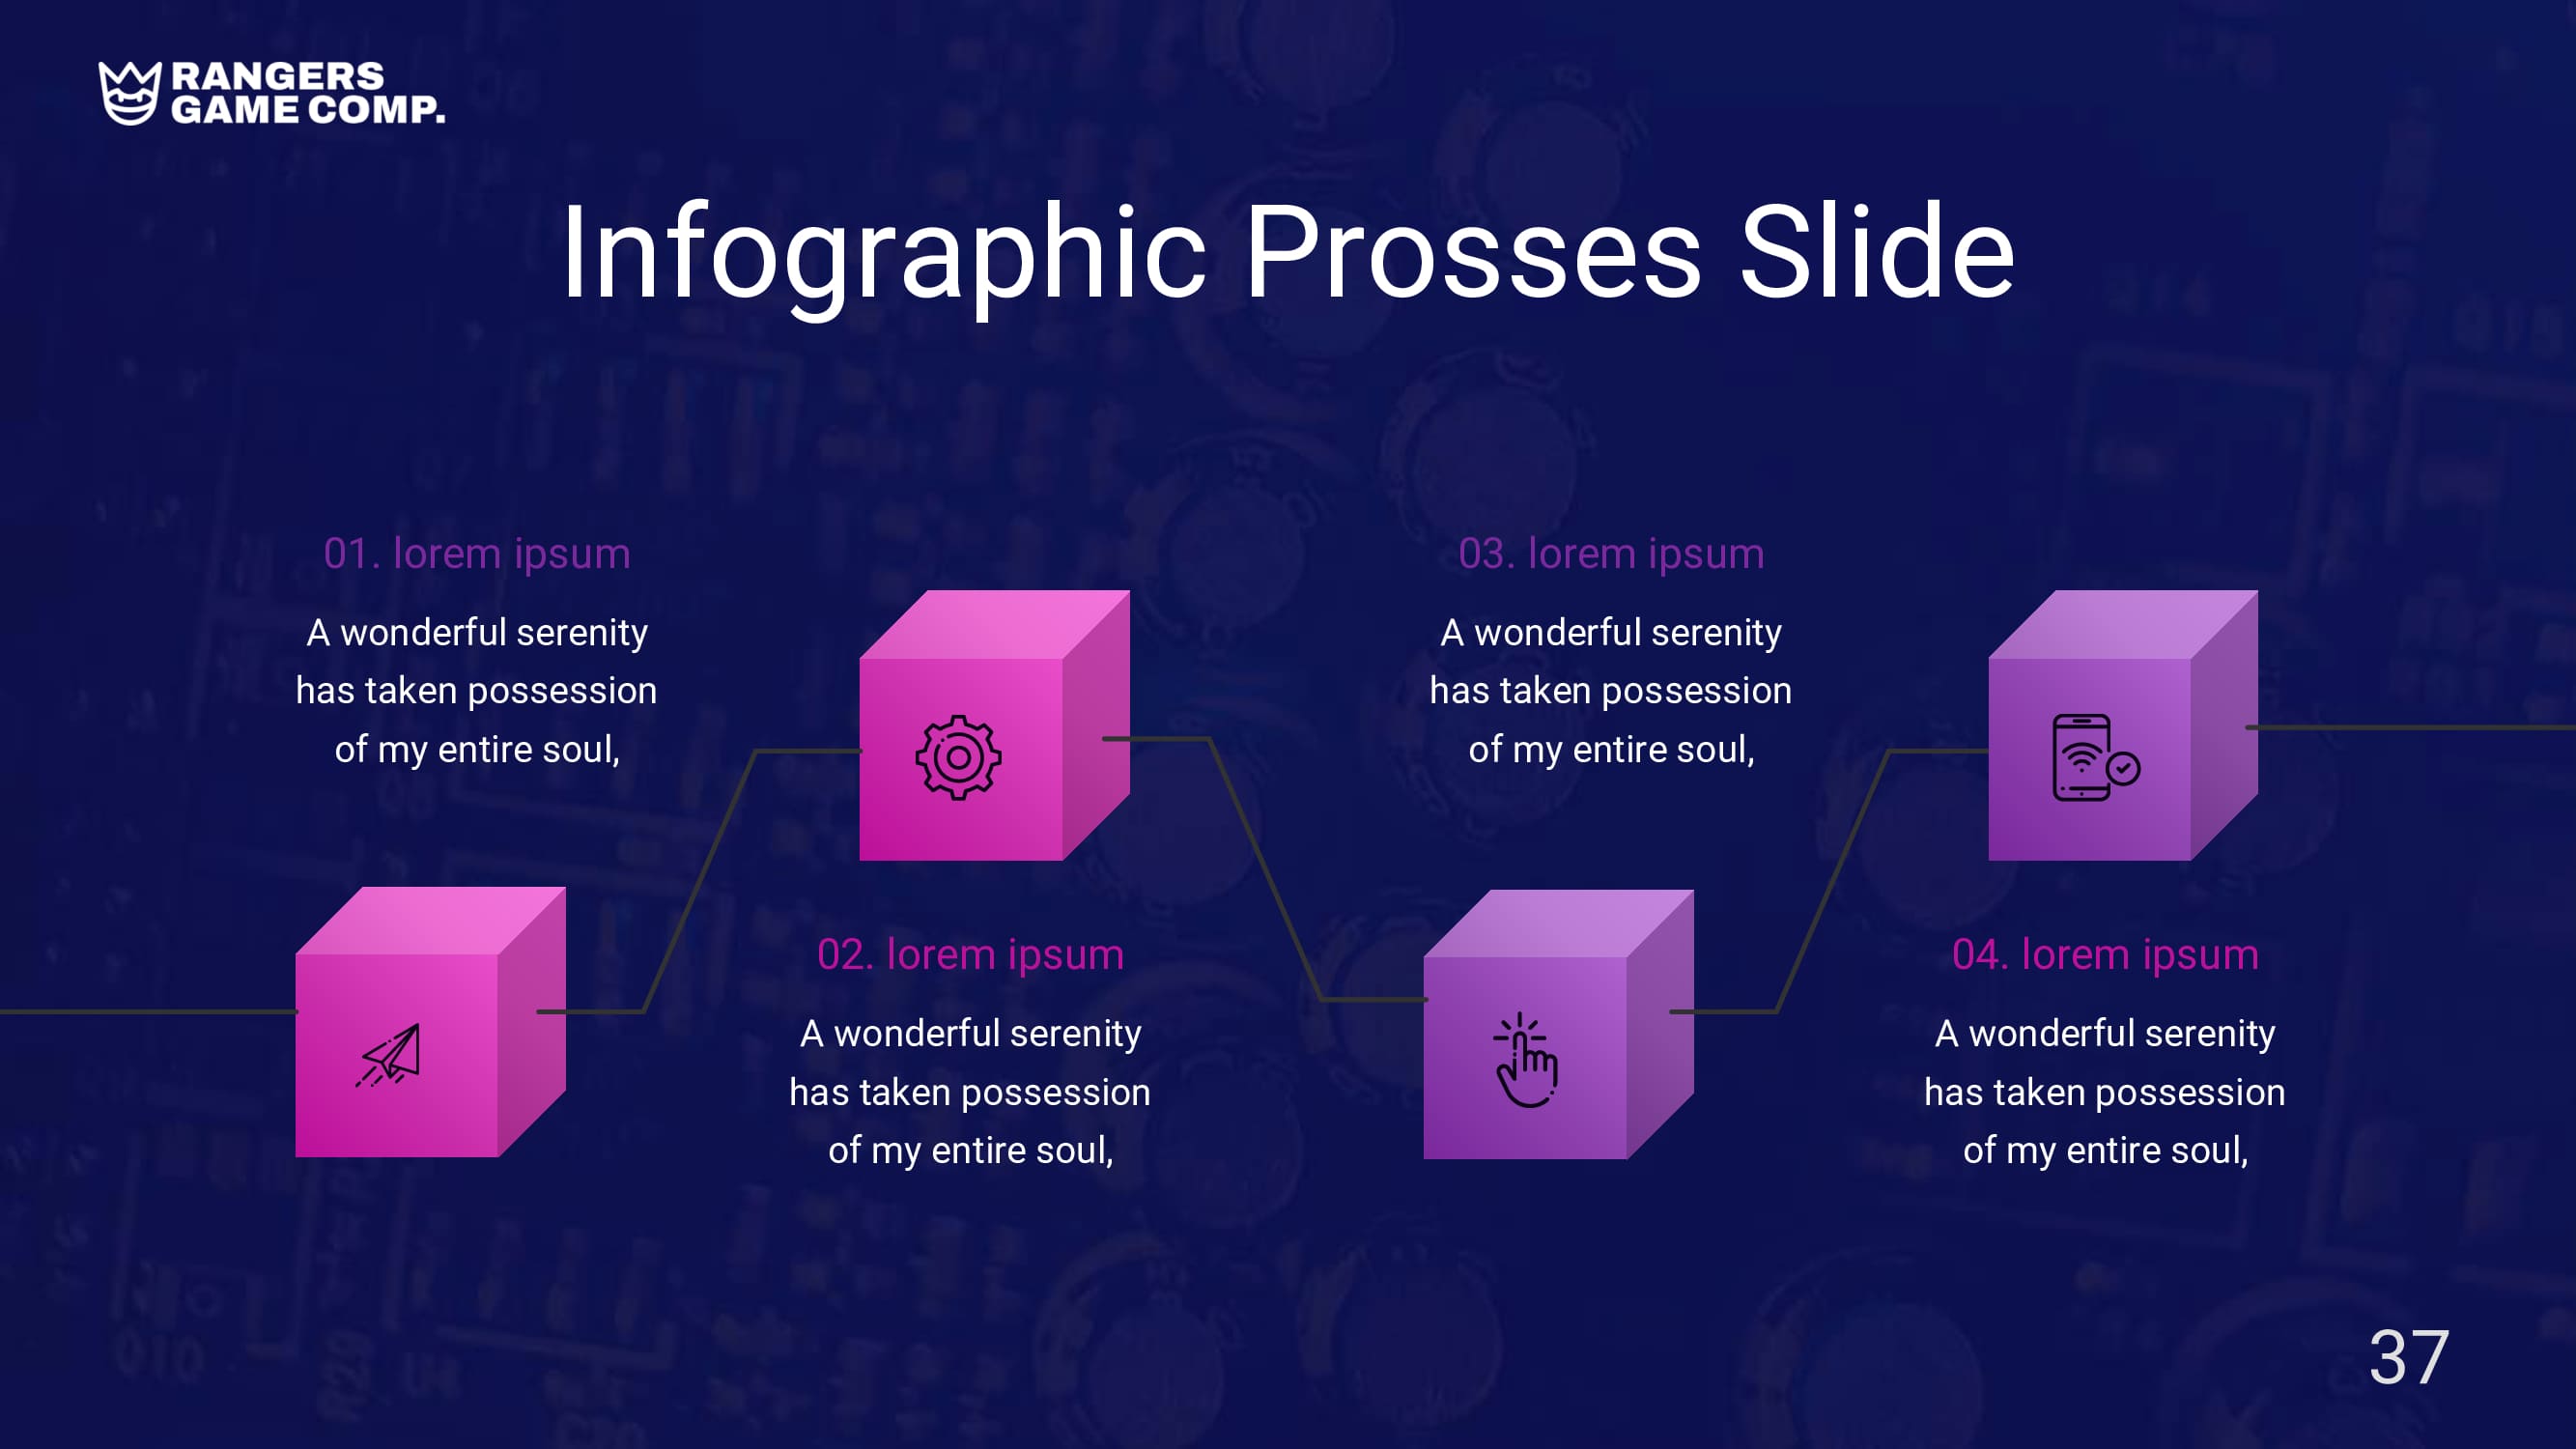 Process infographic slide with 4 pink and purple elements and their description.